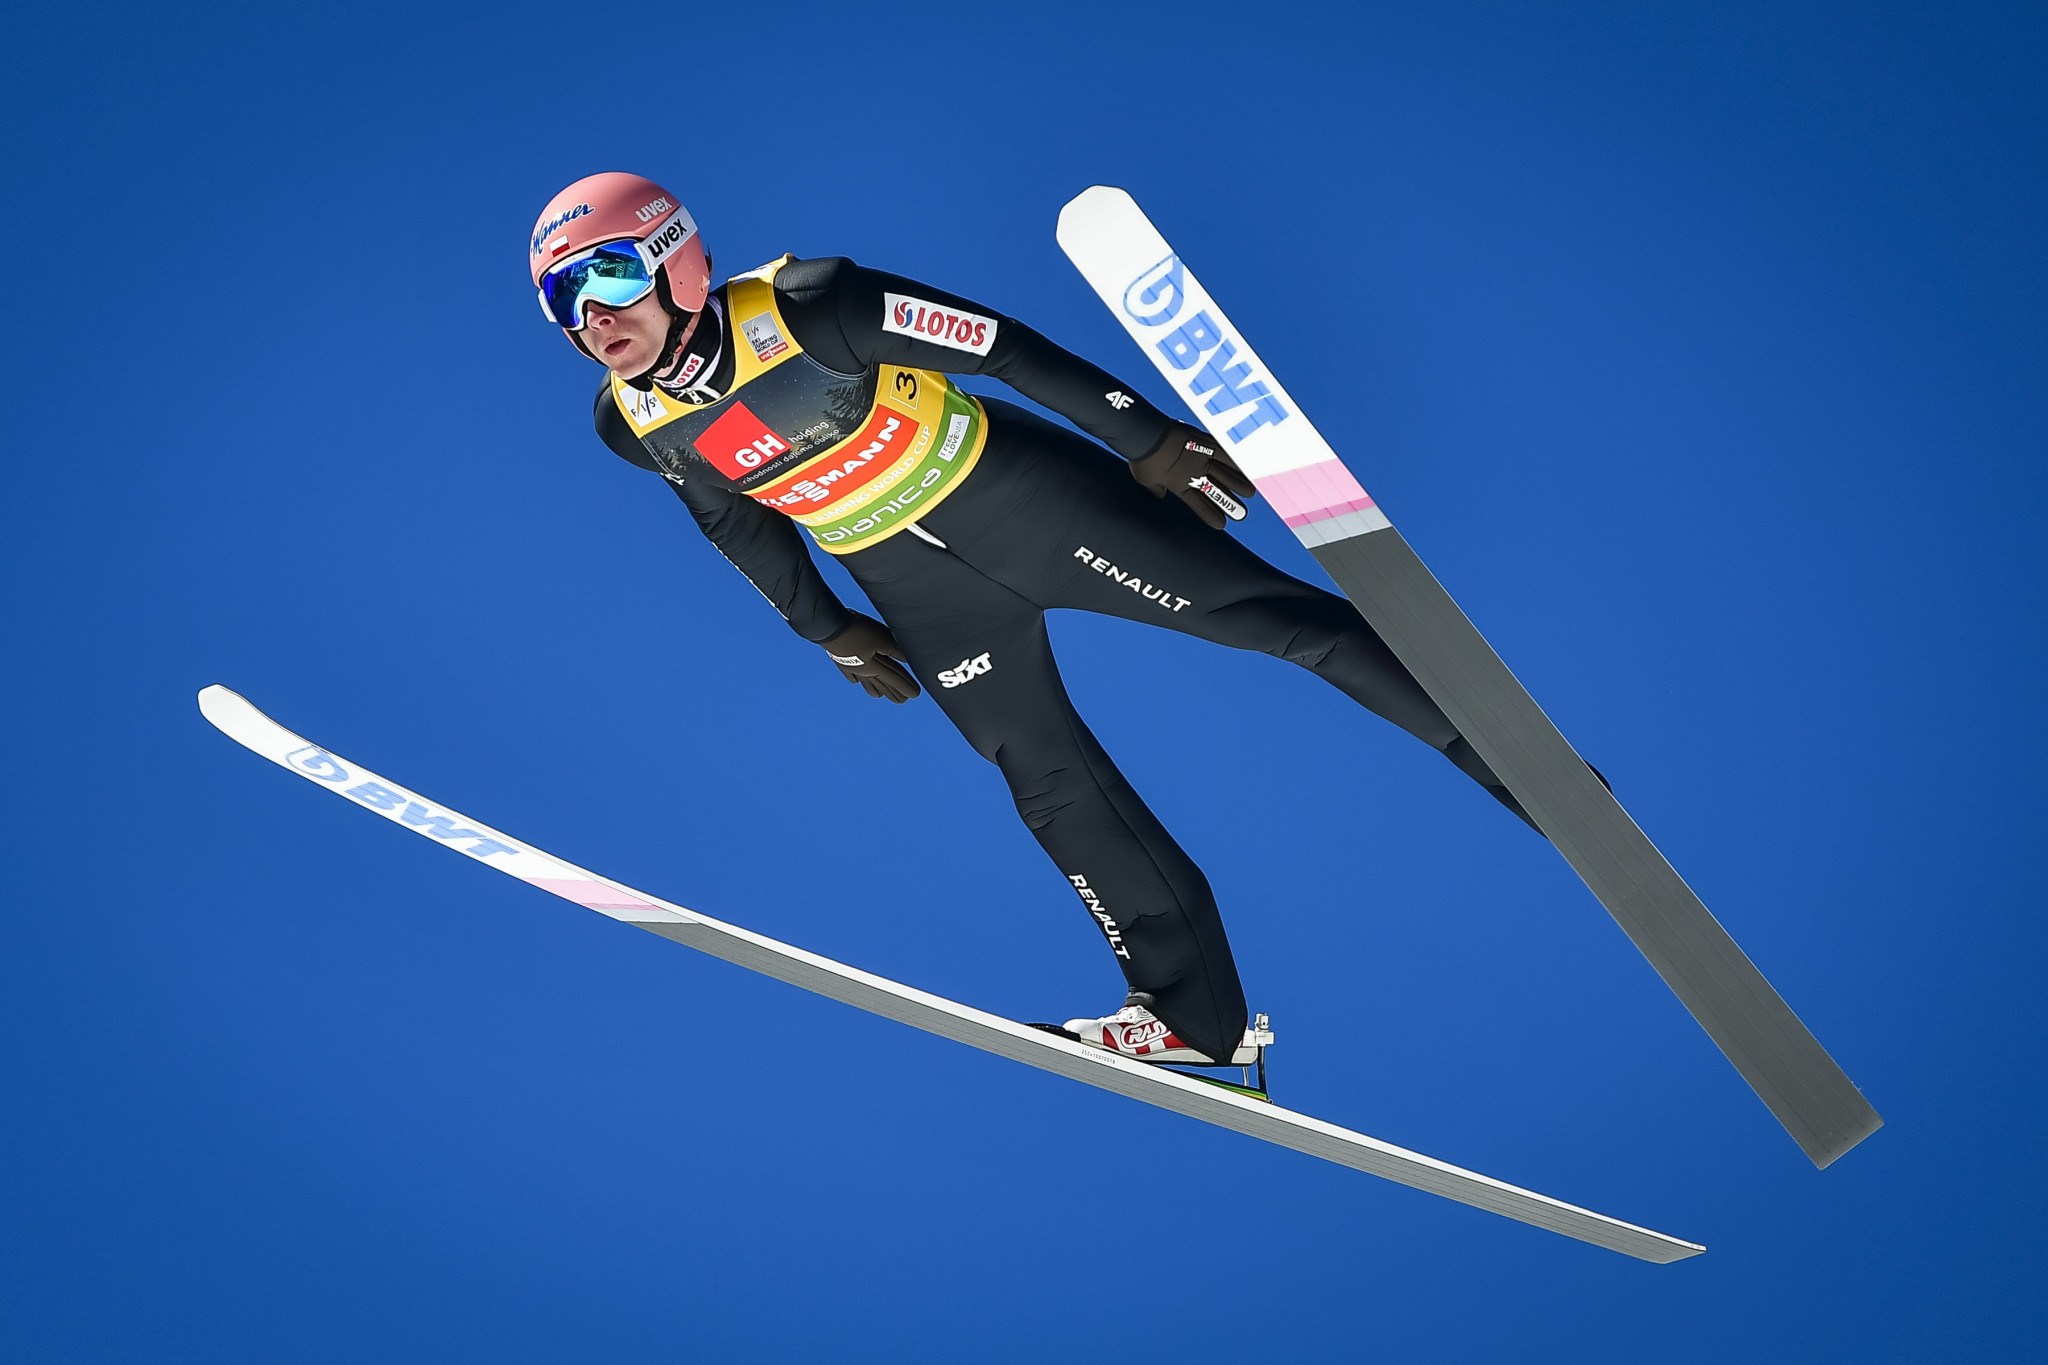 Poland win team competition at FIS Ski Jumping World Cup